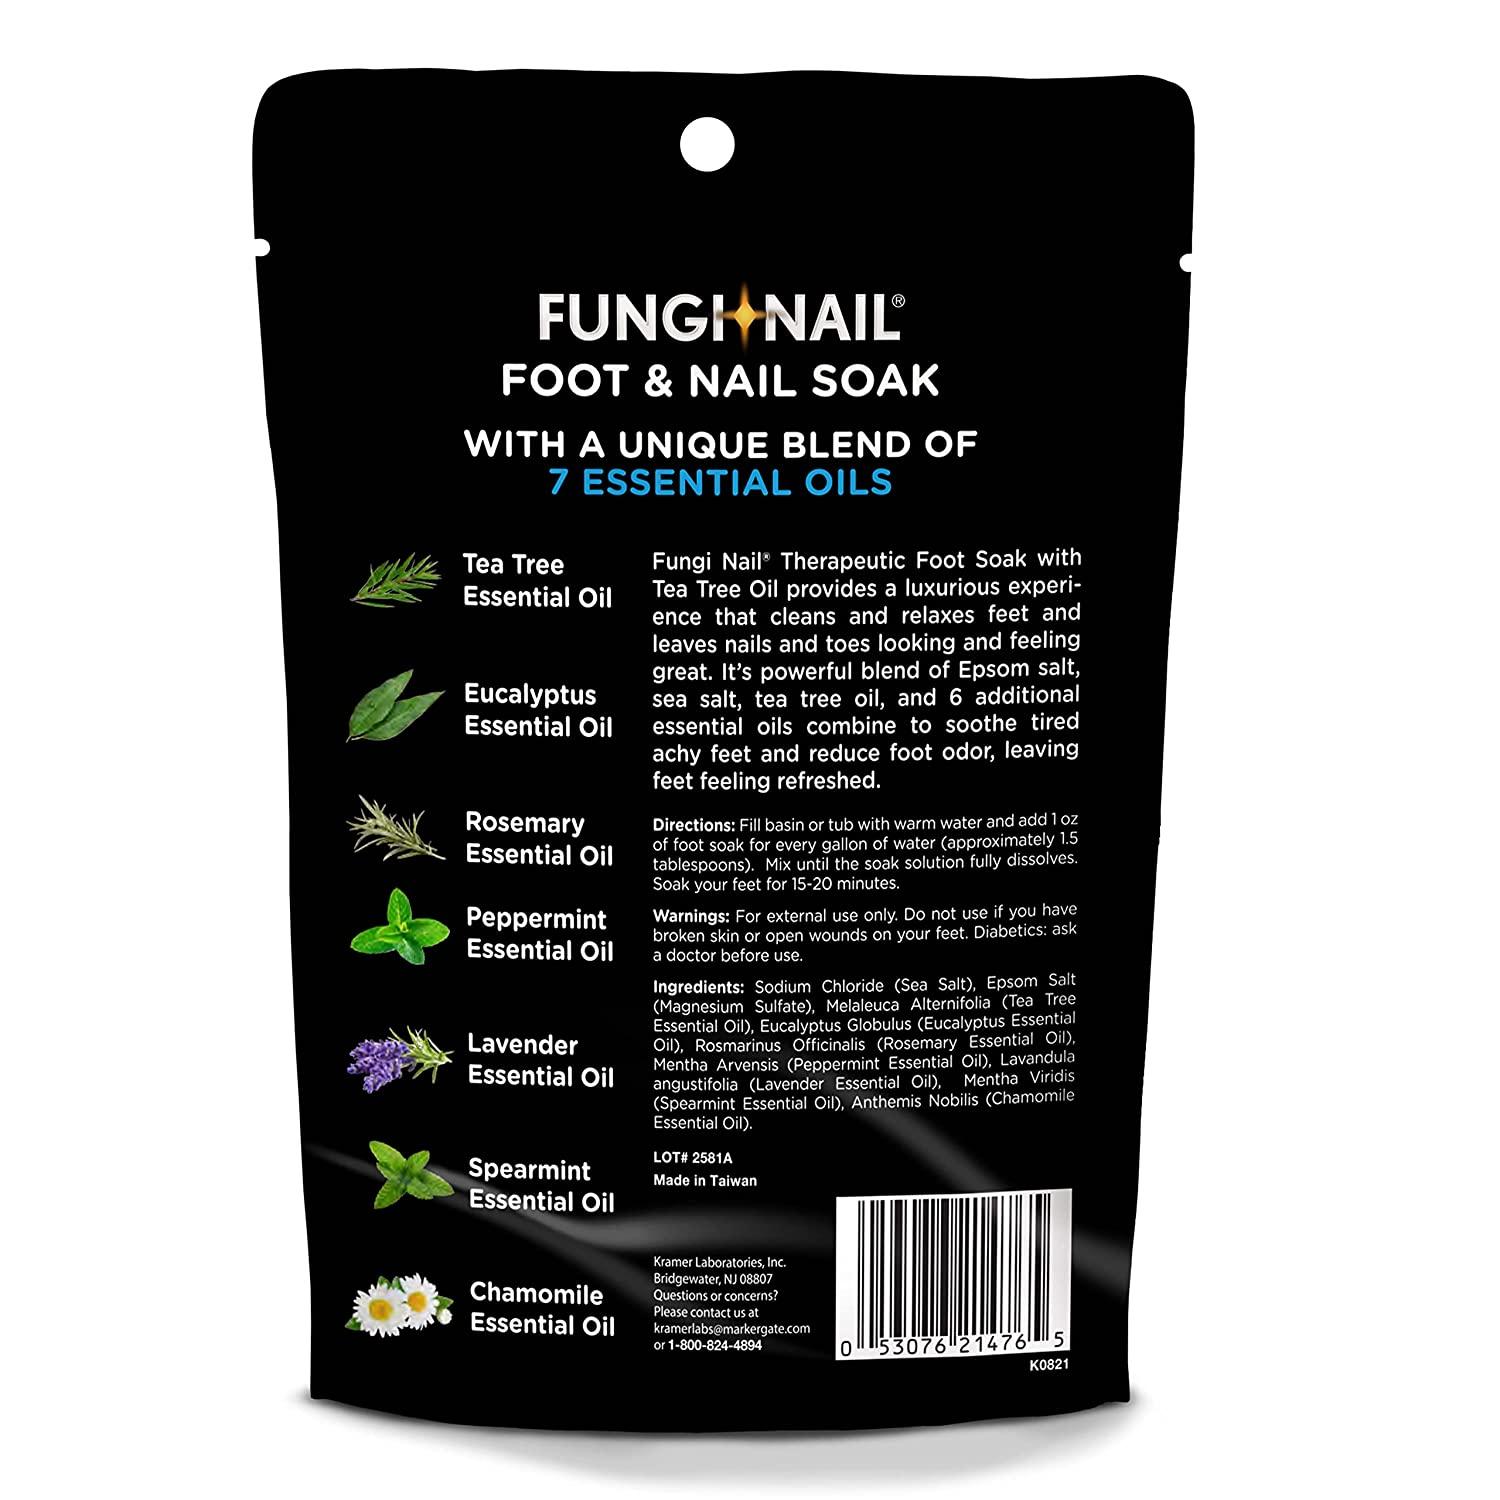 Fungi-Nail Foot Nail Soak With Tea Tree Oil Moisturize, Reduce Foot Odor,  Soothe Aching Feet A Therapeutic Blend Of Rich Mineral Epsom Salt, Pure Sea  Salt, And